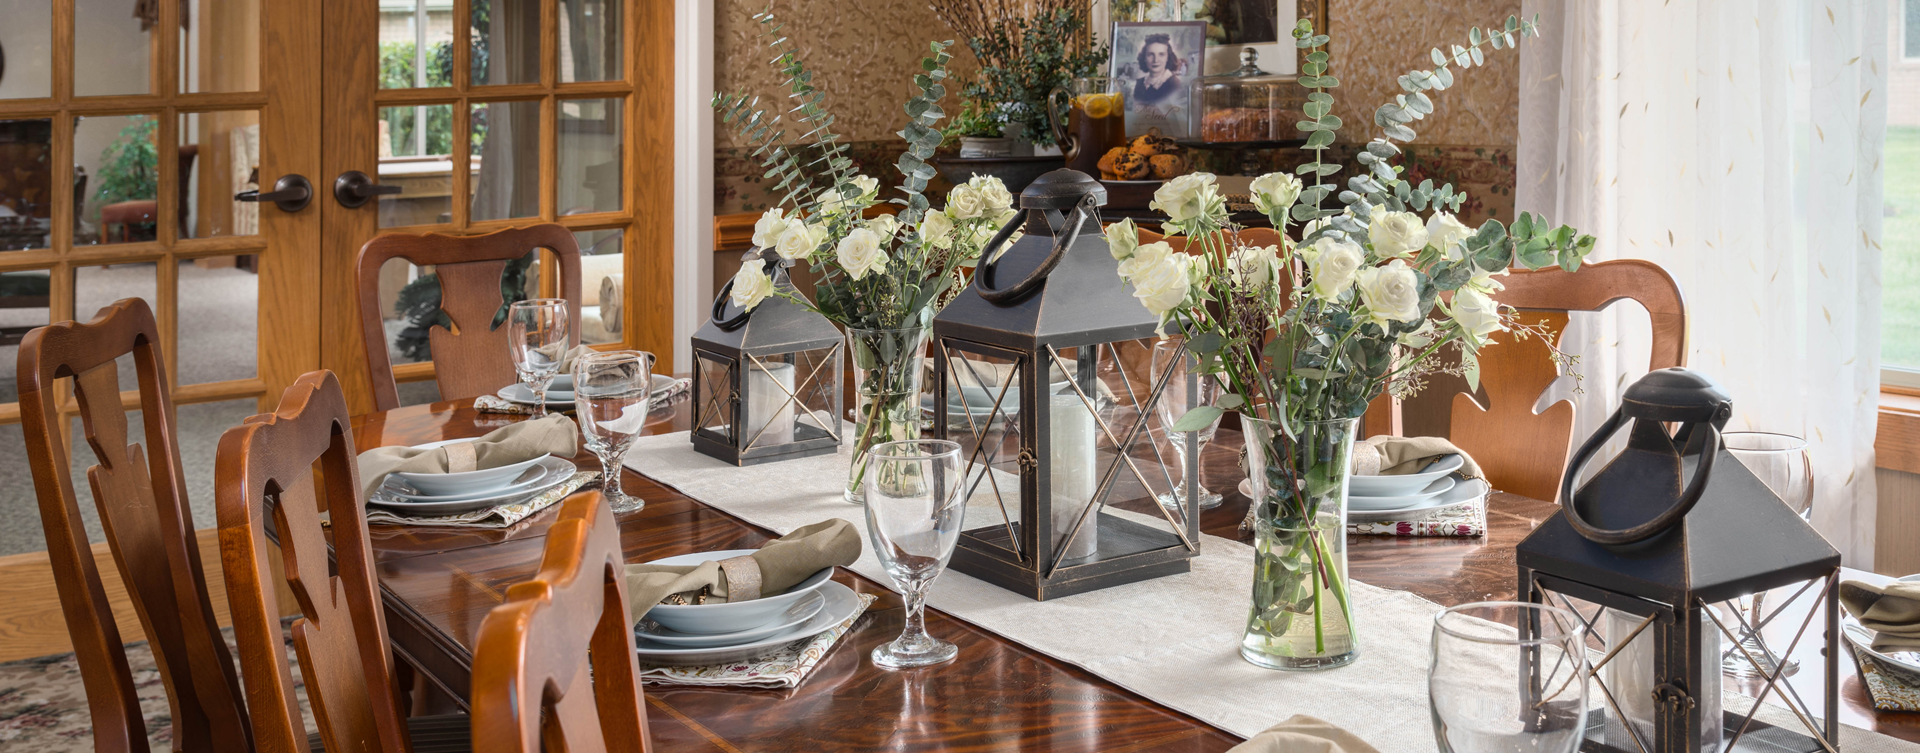 Celebrate special occasions in the private dining room at Bickford of Lancaster